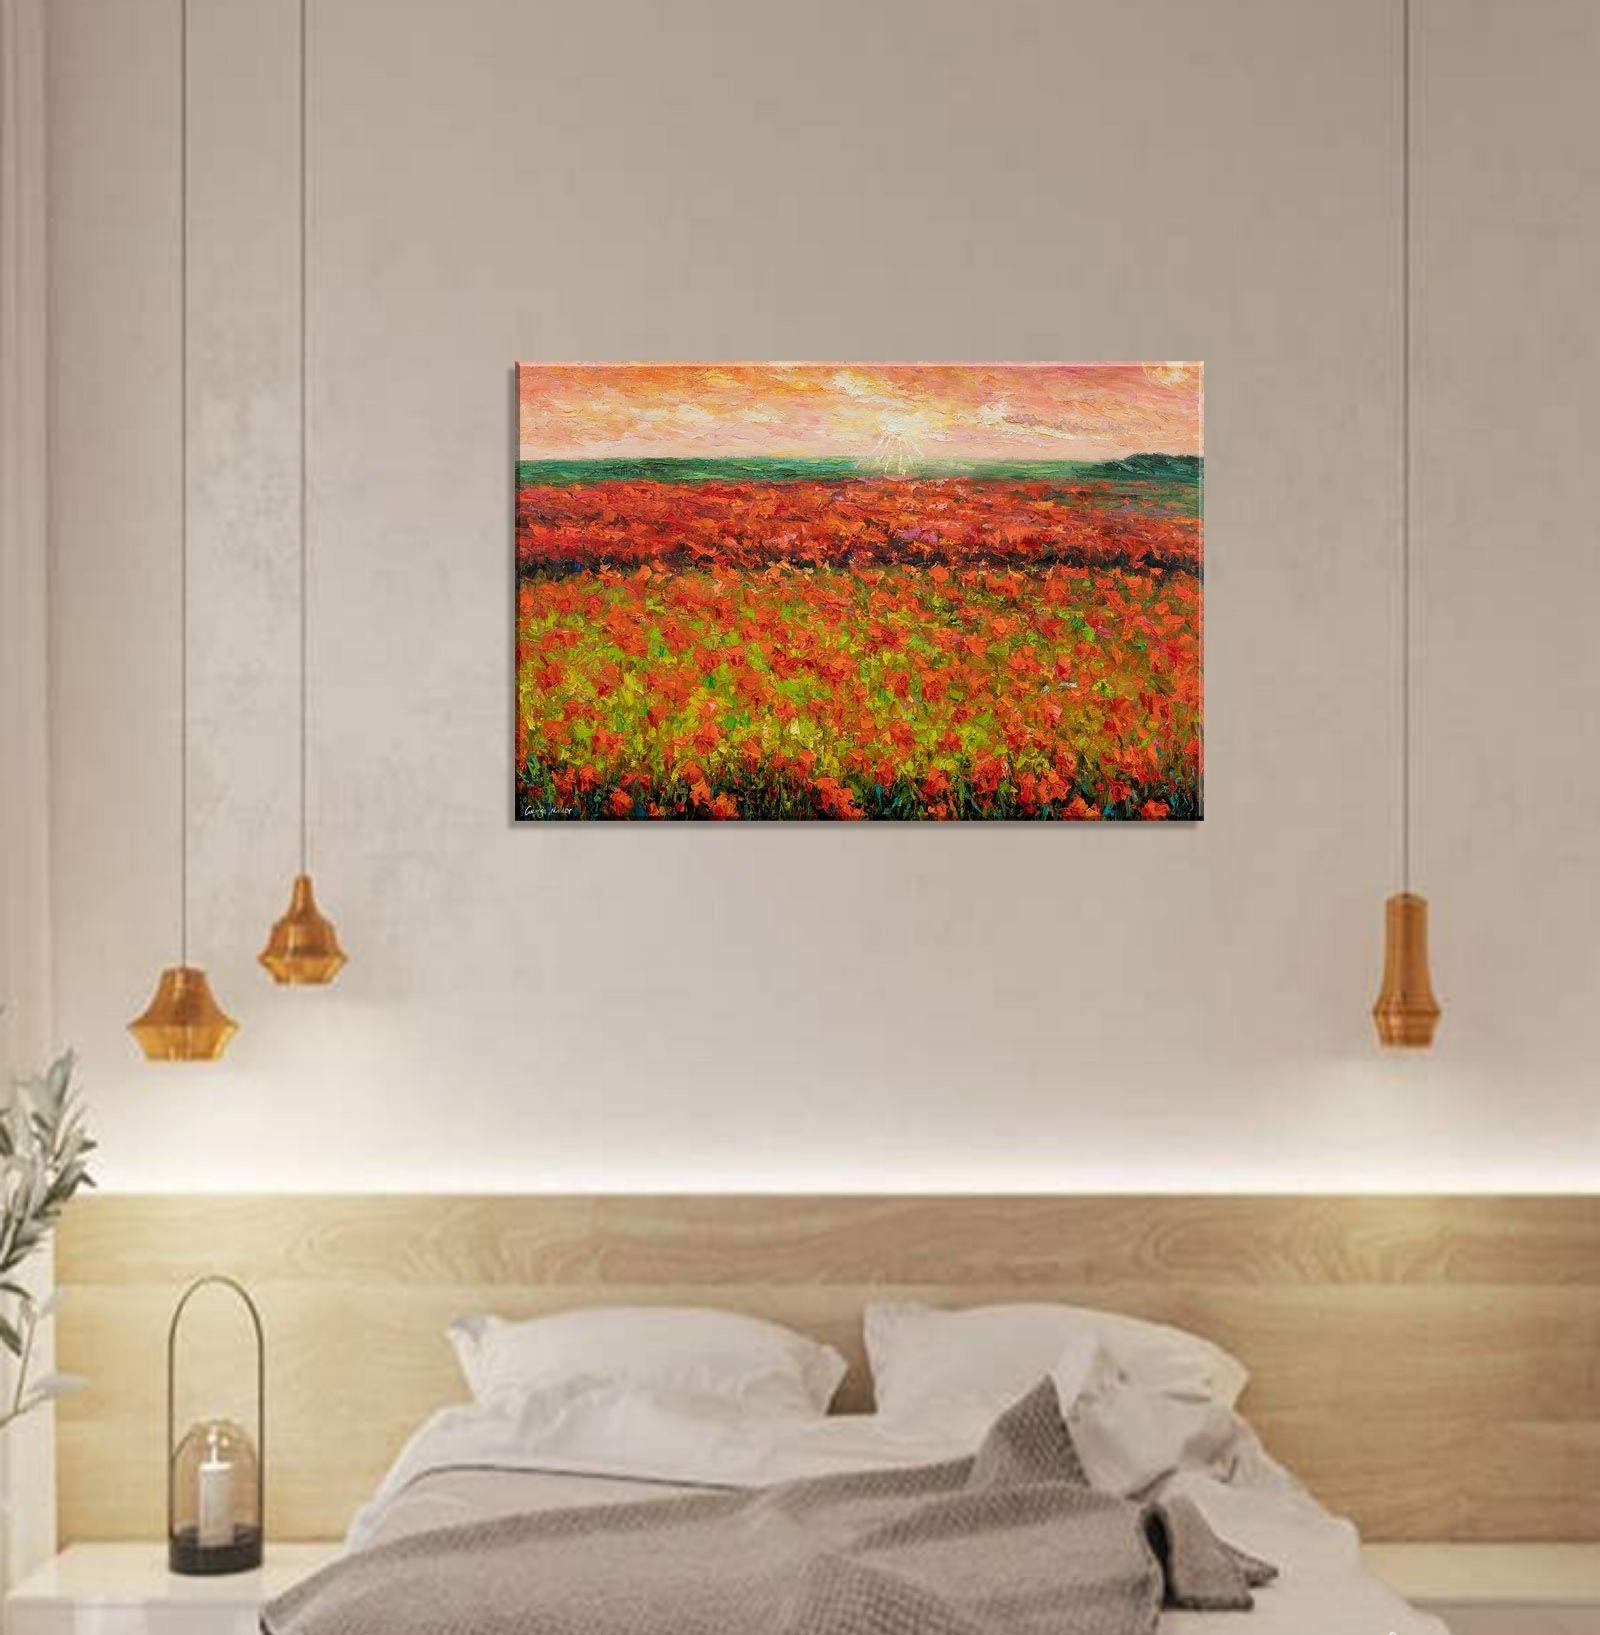 Oil Painting Abstract, Canvas Art, Modern Wall Art, Large Landscape Painting, Modern Painting, Original Abstract Art, Floral Feild Painting